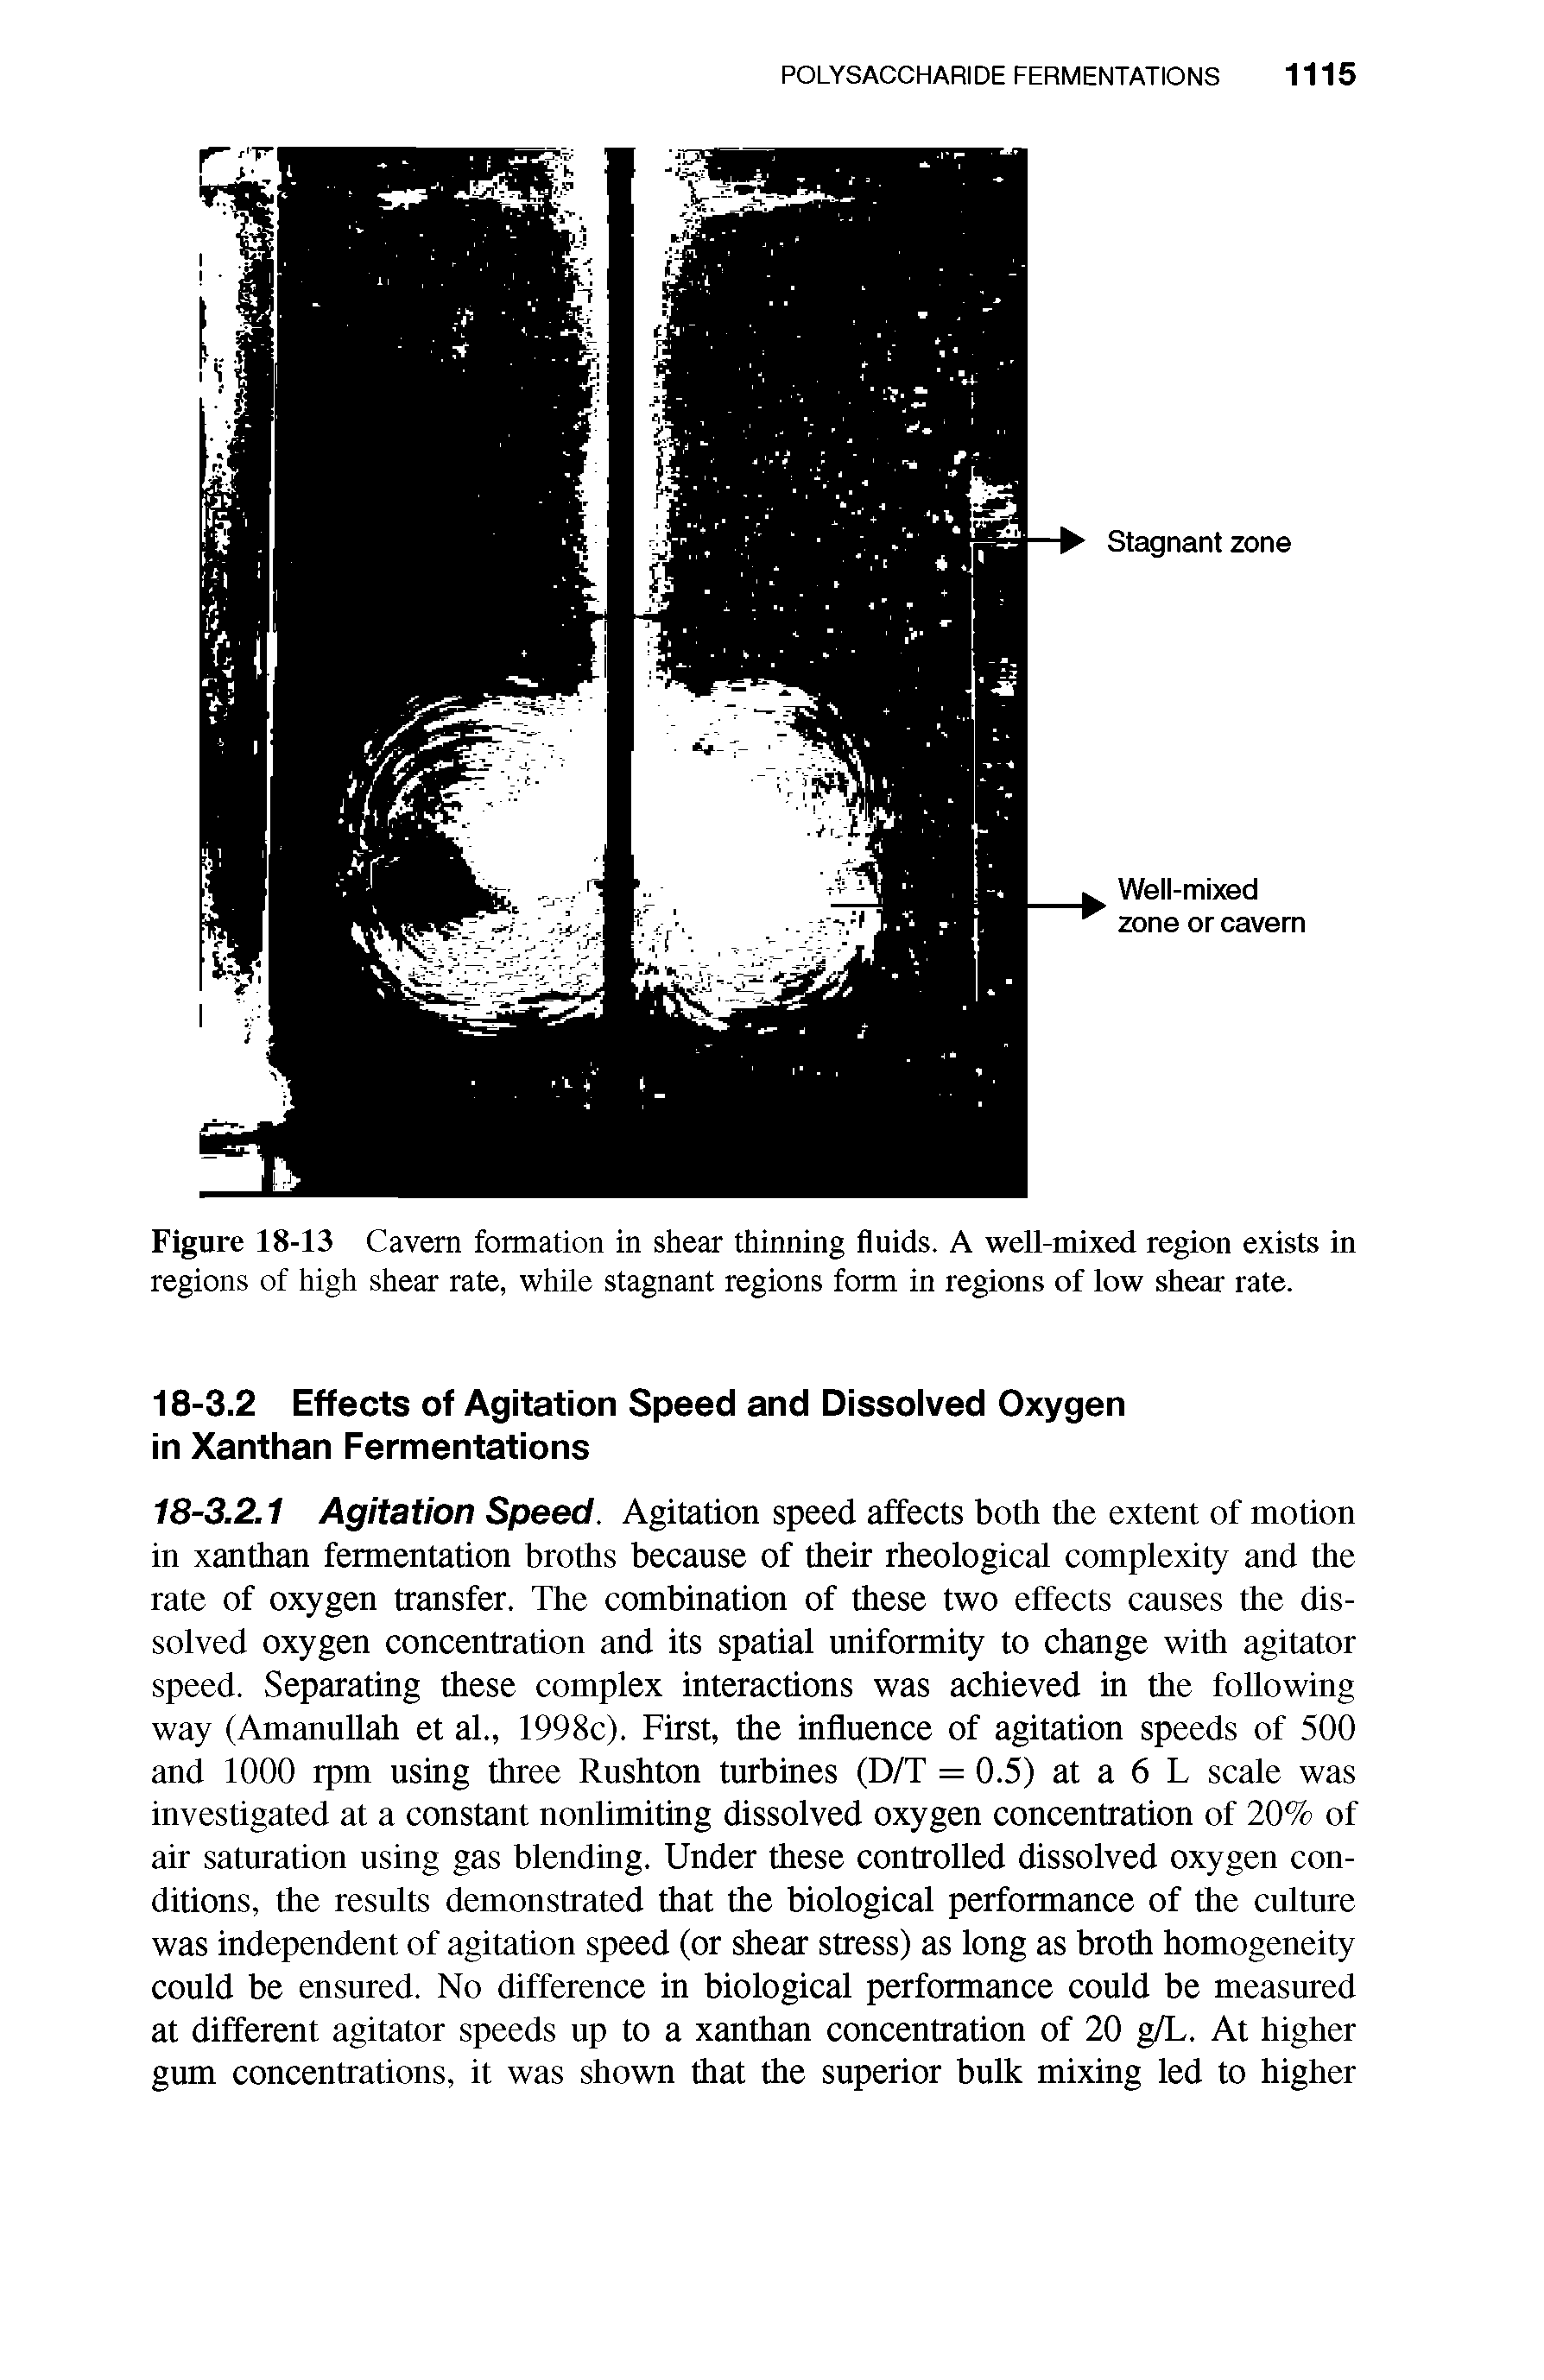 Figure 18-13 Cavern formation in shear thinning fluids. A well-mixed region exists in regions of high shear rate, while stagnant regions form in regions of low shear rate.